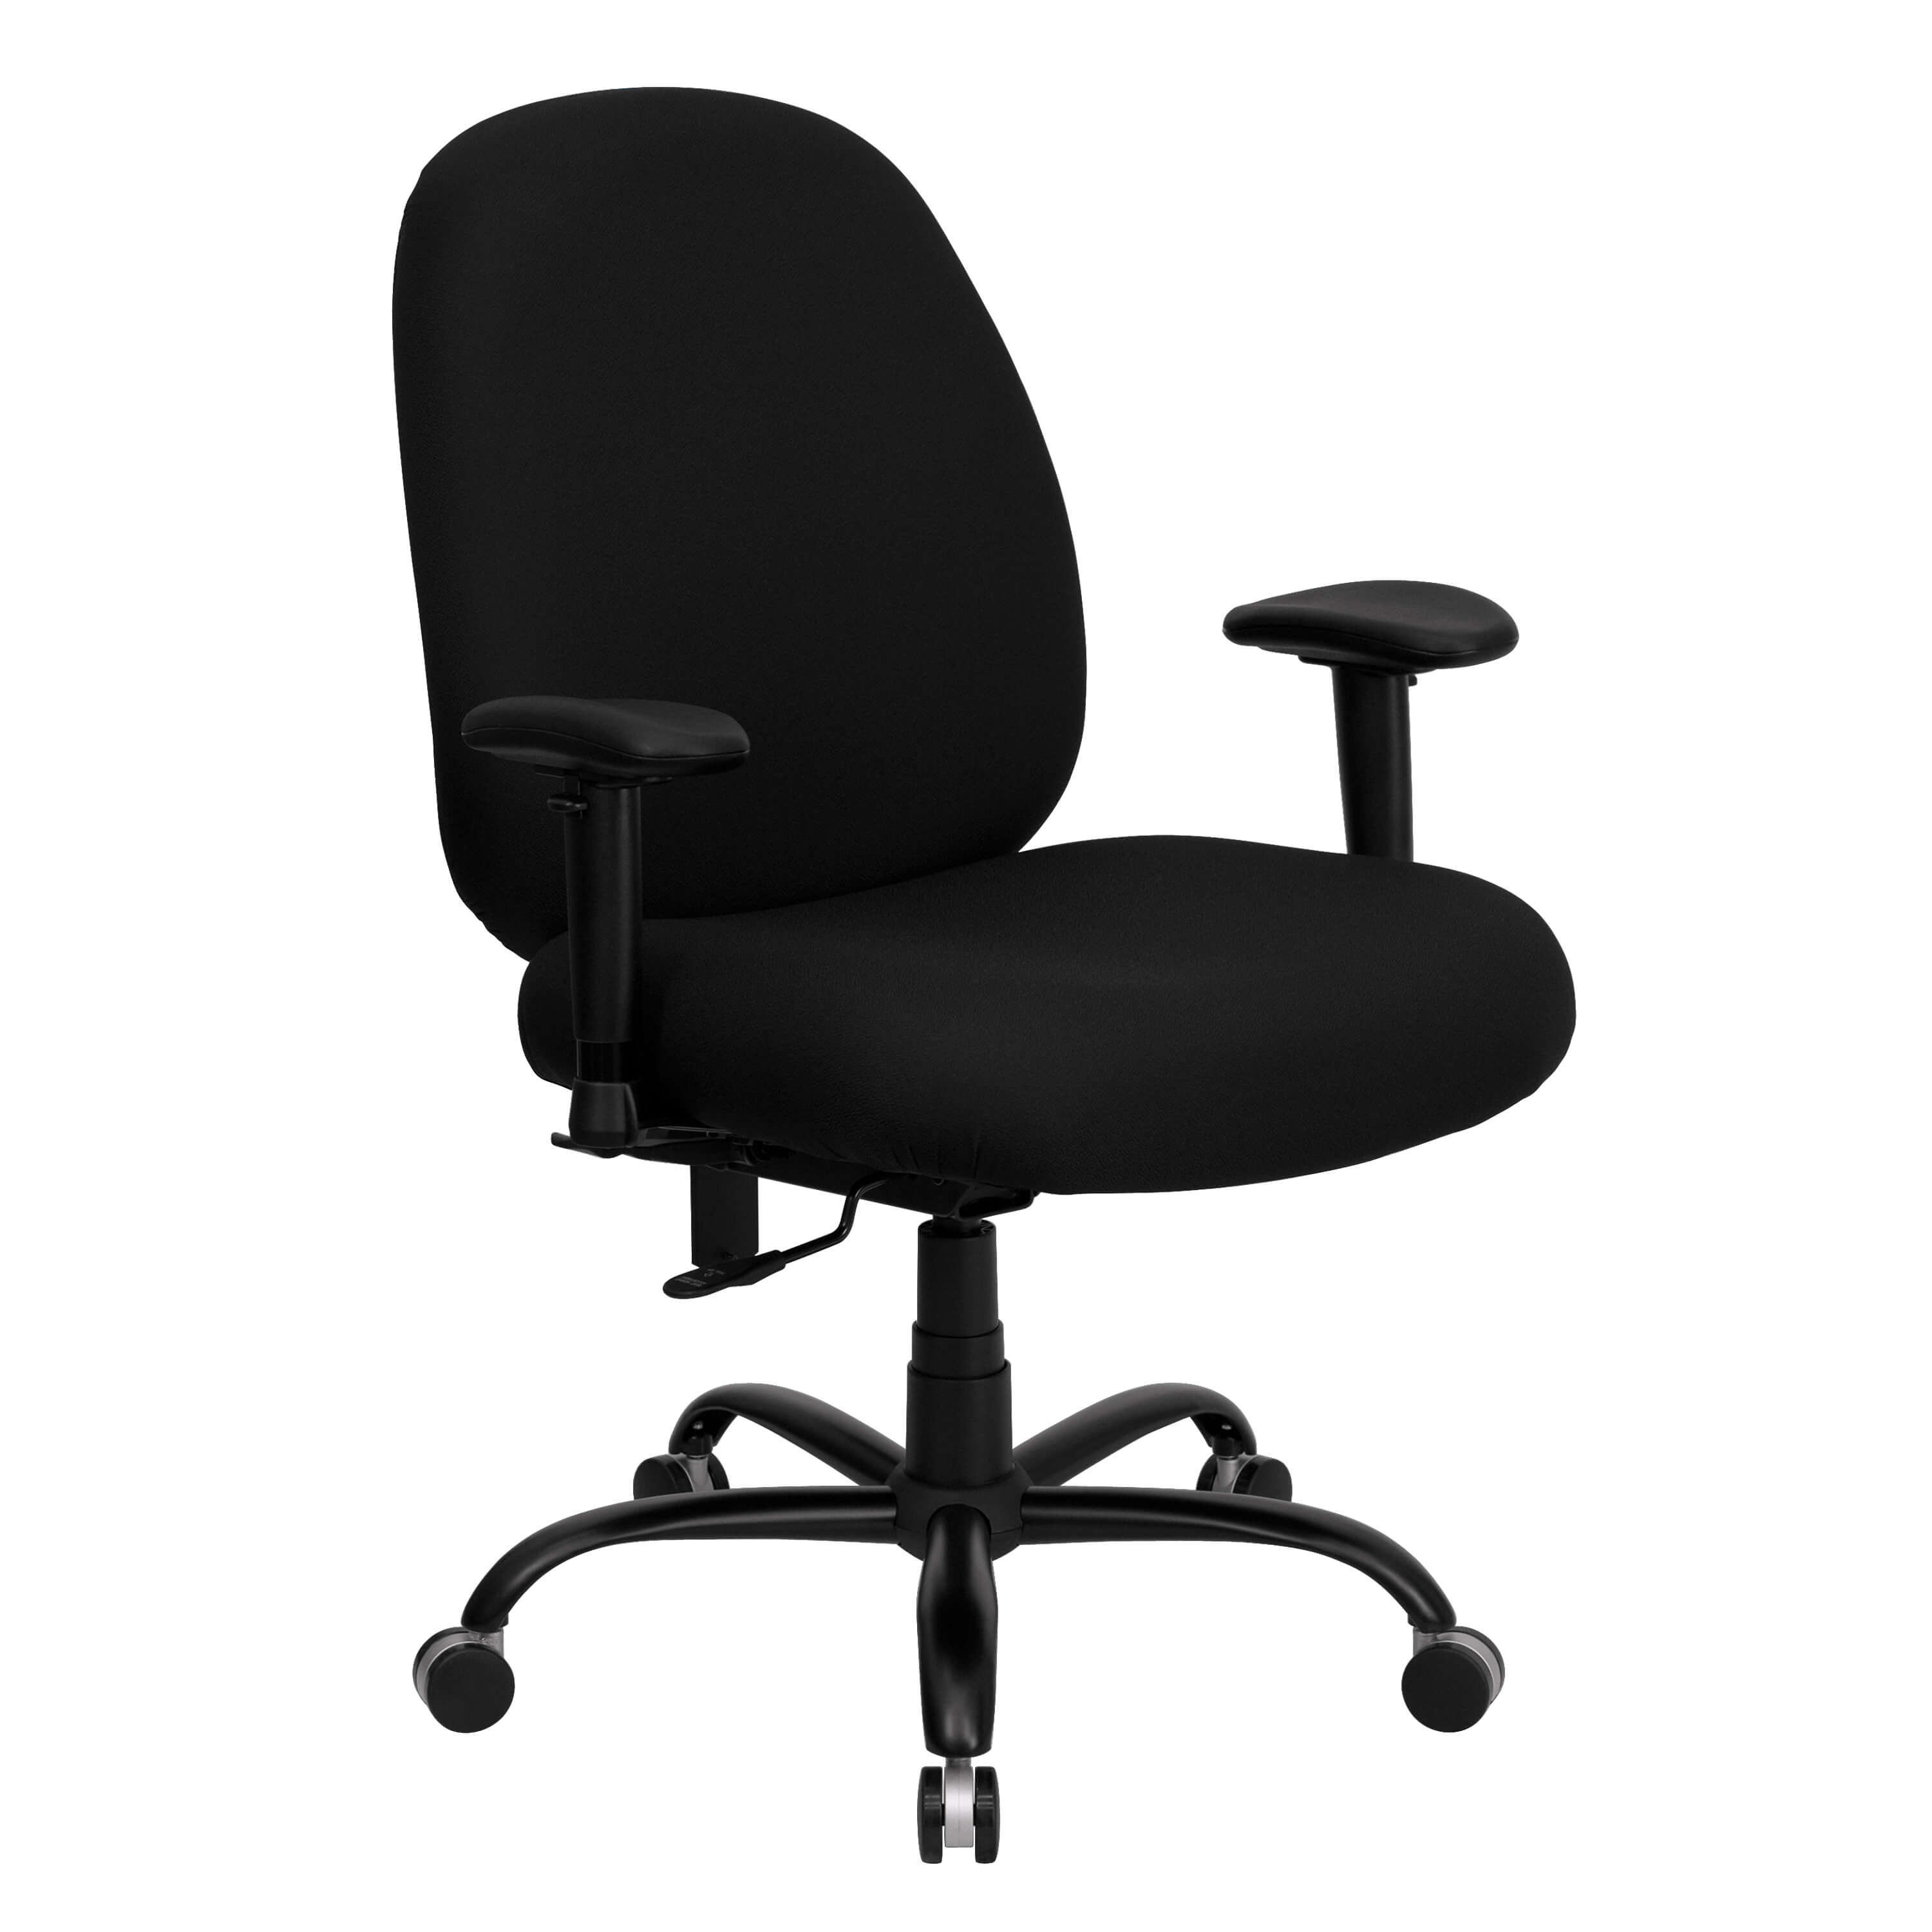 big-and-tall-office-chairs-office-chair-400-lb-weight-capacity.jpg